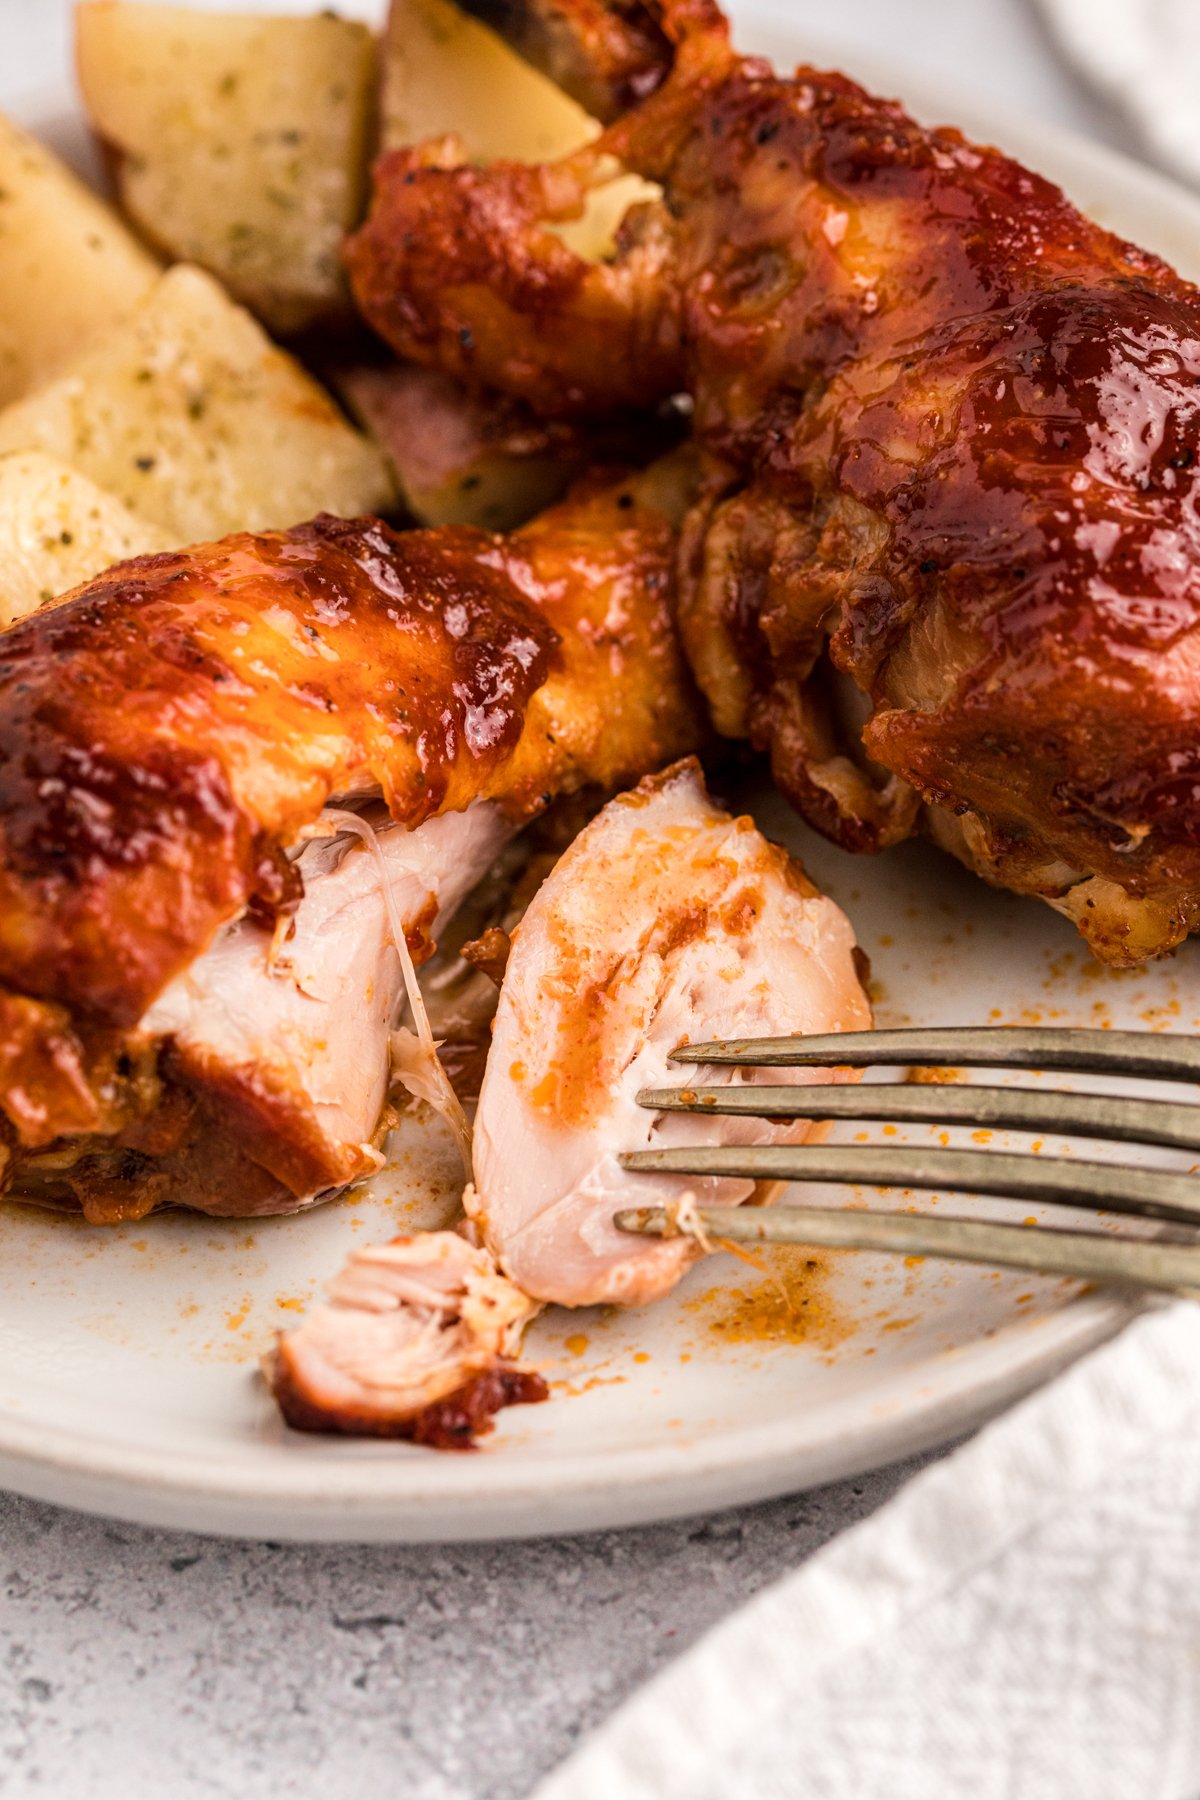 barbecue chicken potatoes and potatoes on a plate.